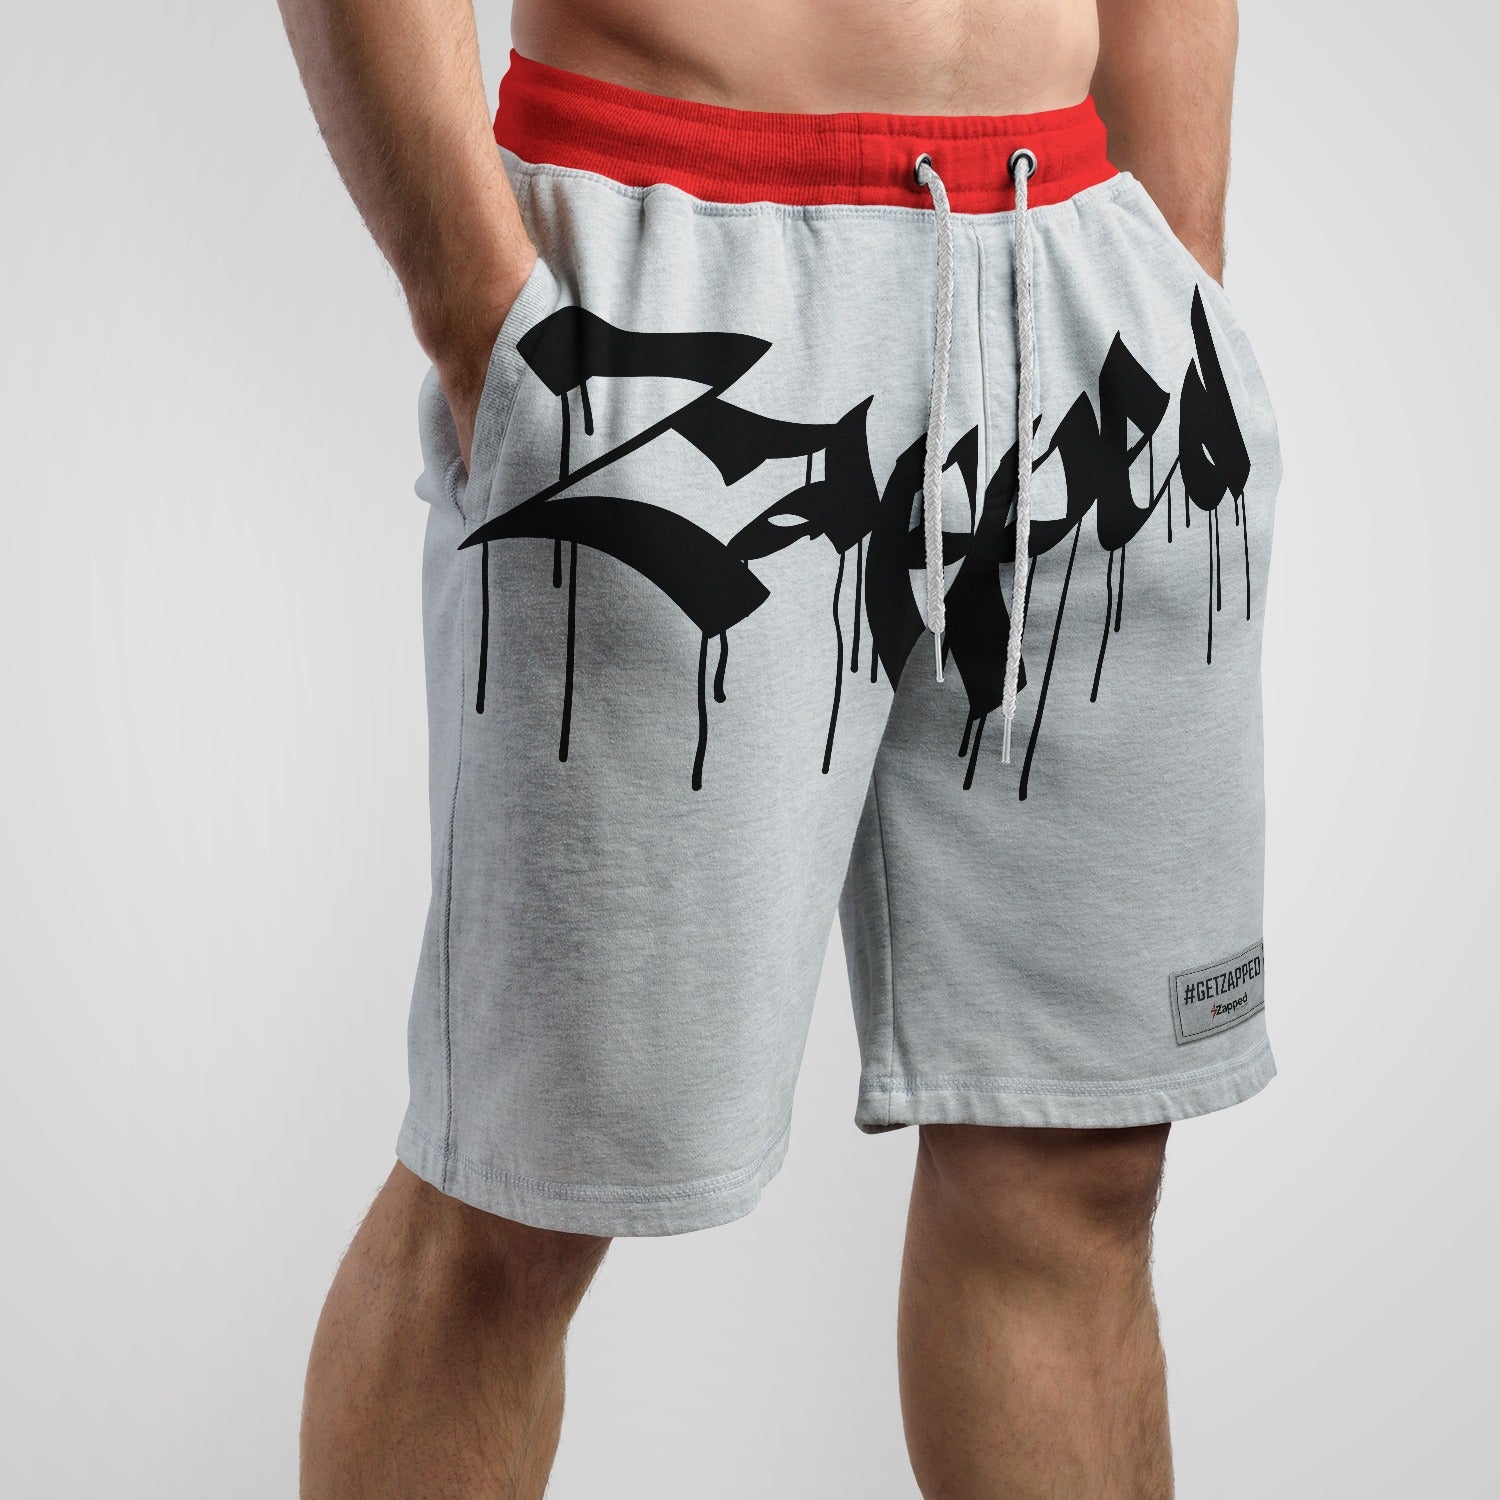 Zapped Pack Of 4 Terry Cotton Shorts